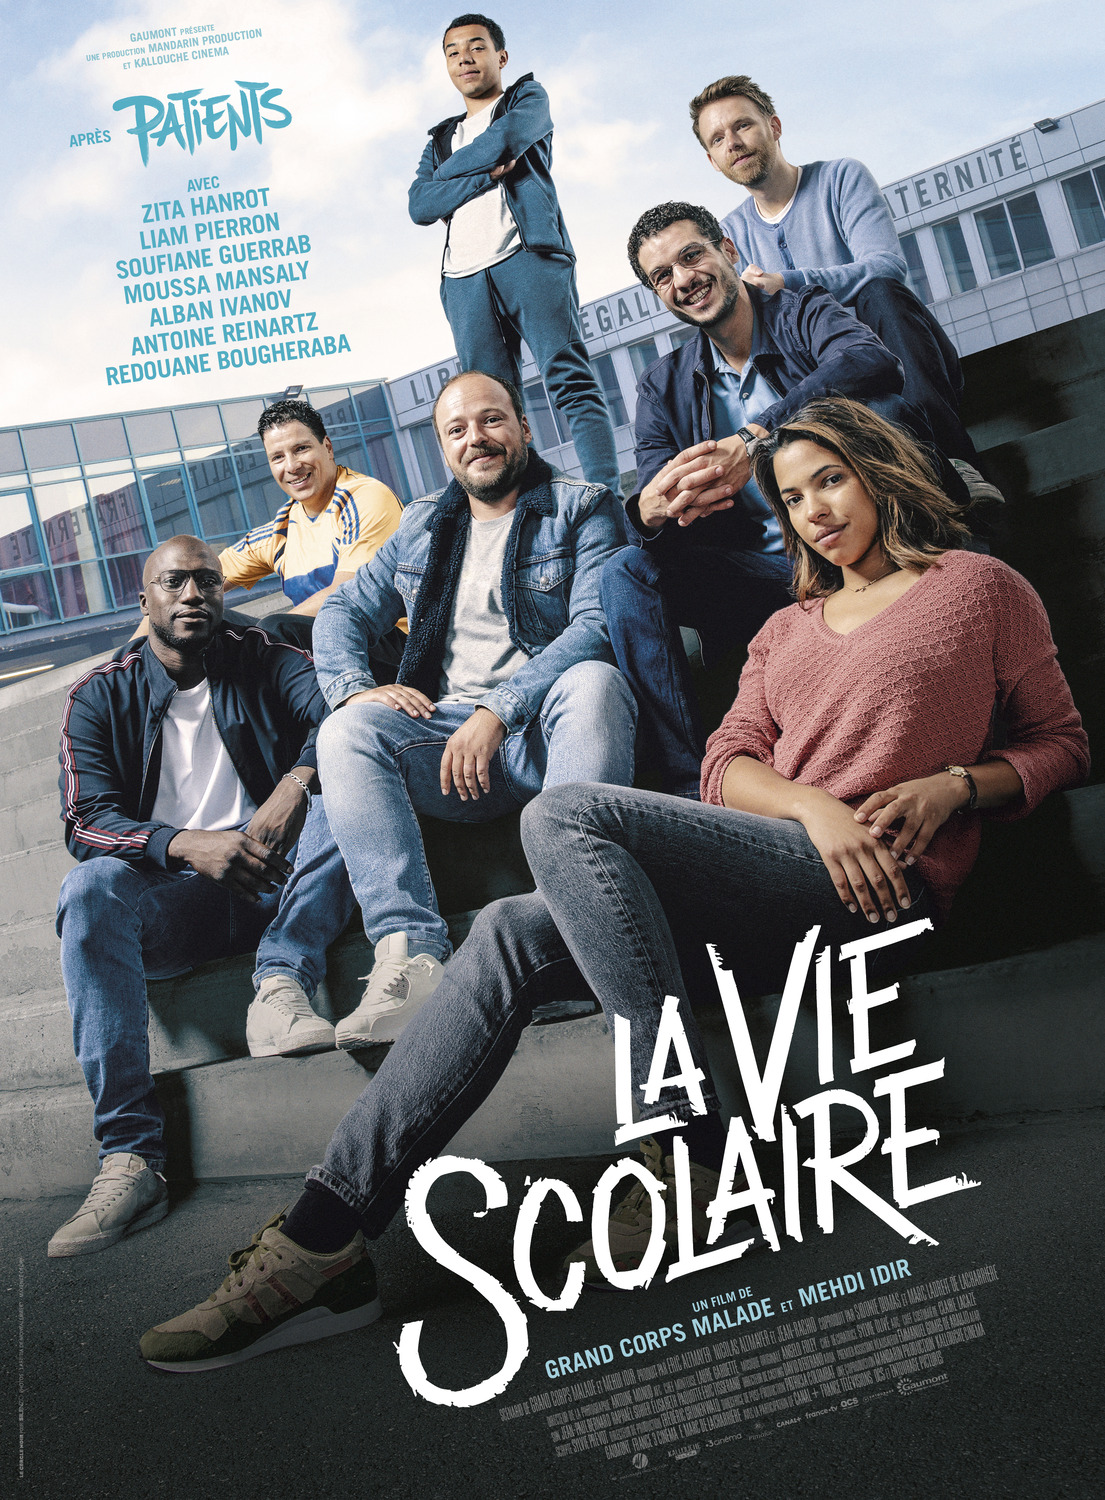 Extra Large Movie Poster Image for La vie scolaire 